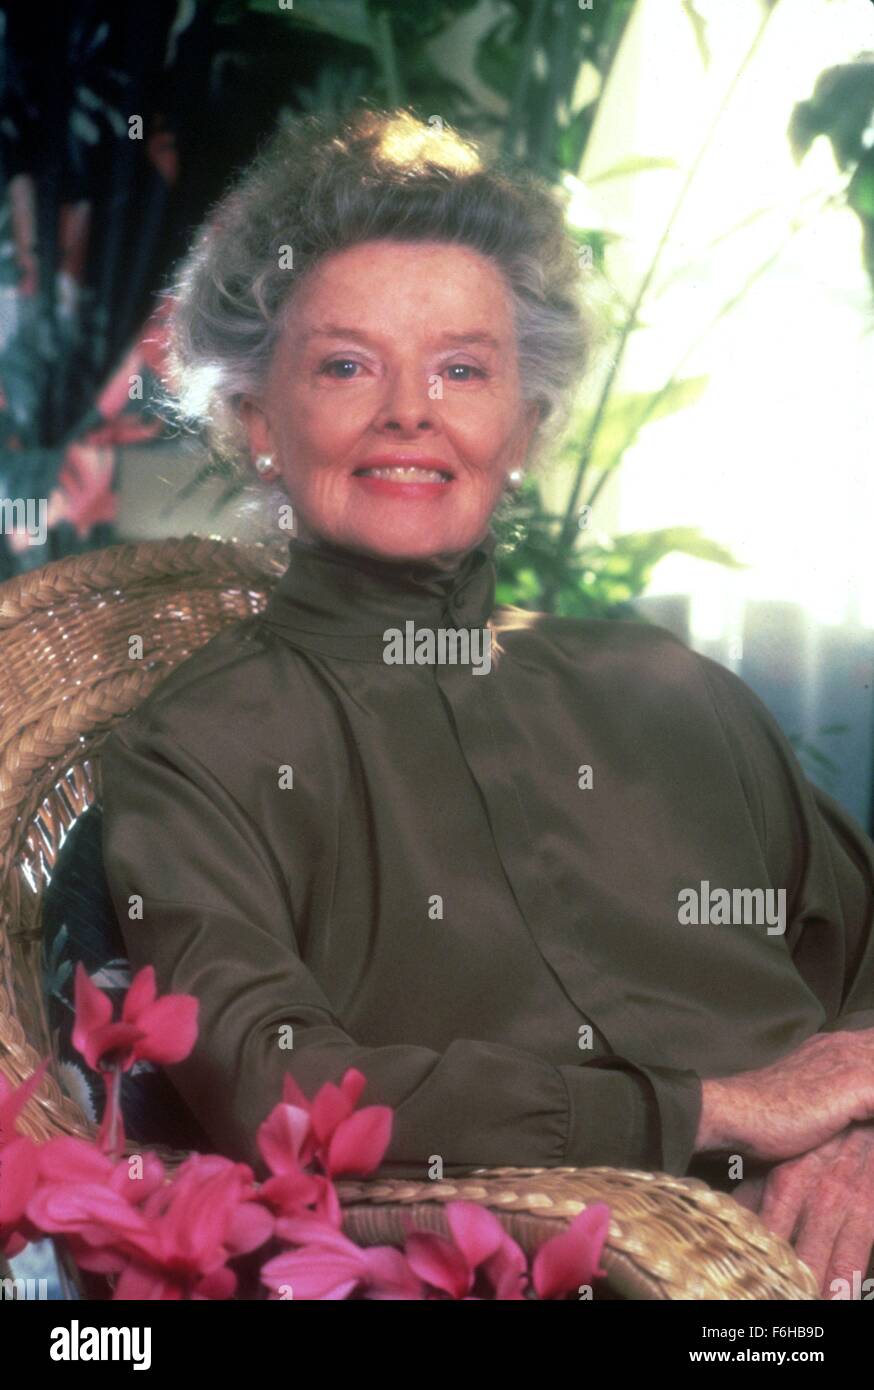 1986, Film Title: MRS. DELAFIELD WANTS TO MARRY, Director: GEORGE SCHAEFER, Pictured: KATHARINE HEPBURN, FRAMED (FLOWERS), FRAMED (PLANTS), WINDOW, AVAILABLE LIGHT, STUDIO LIGHT, CHAIR, SITTING, SEATED. (Credit Image: SNAP) Stock Photo